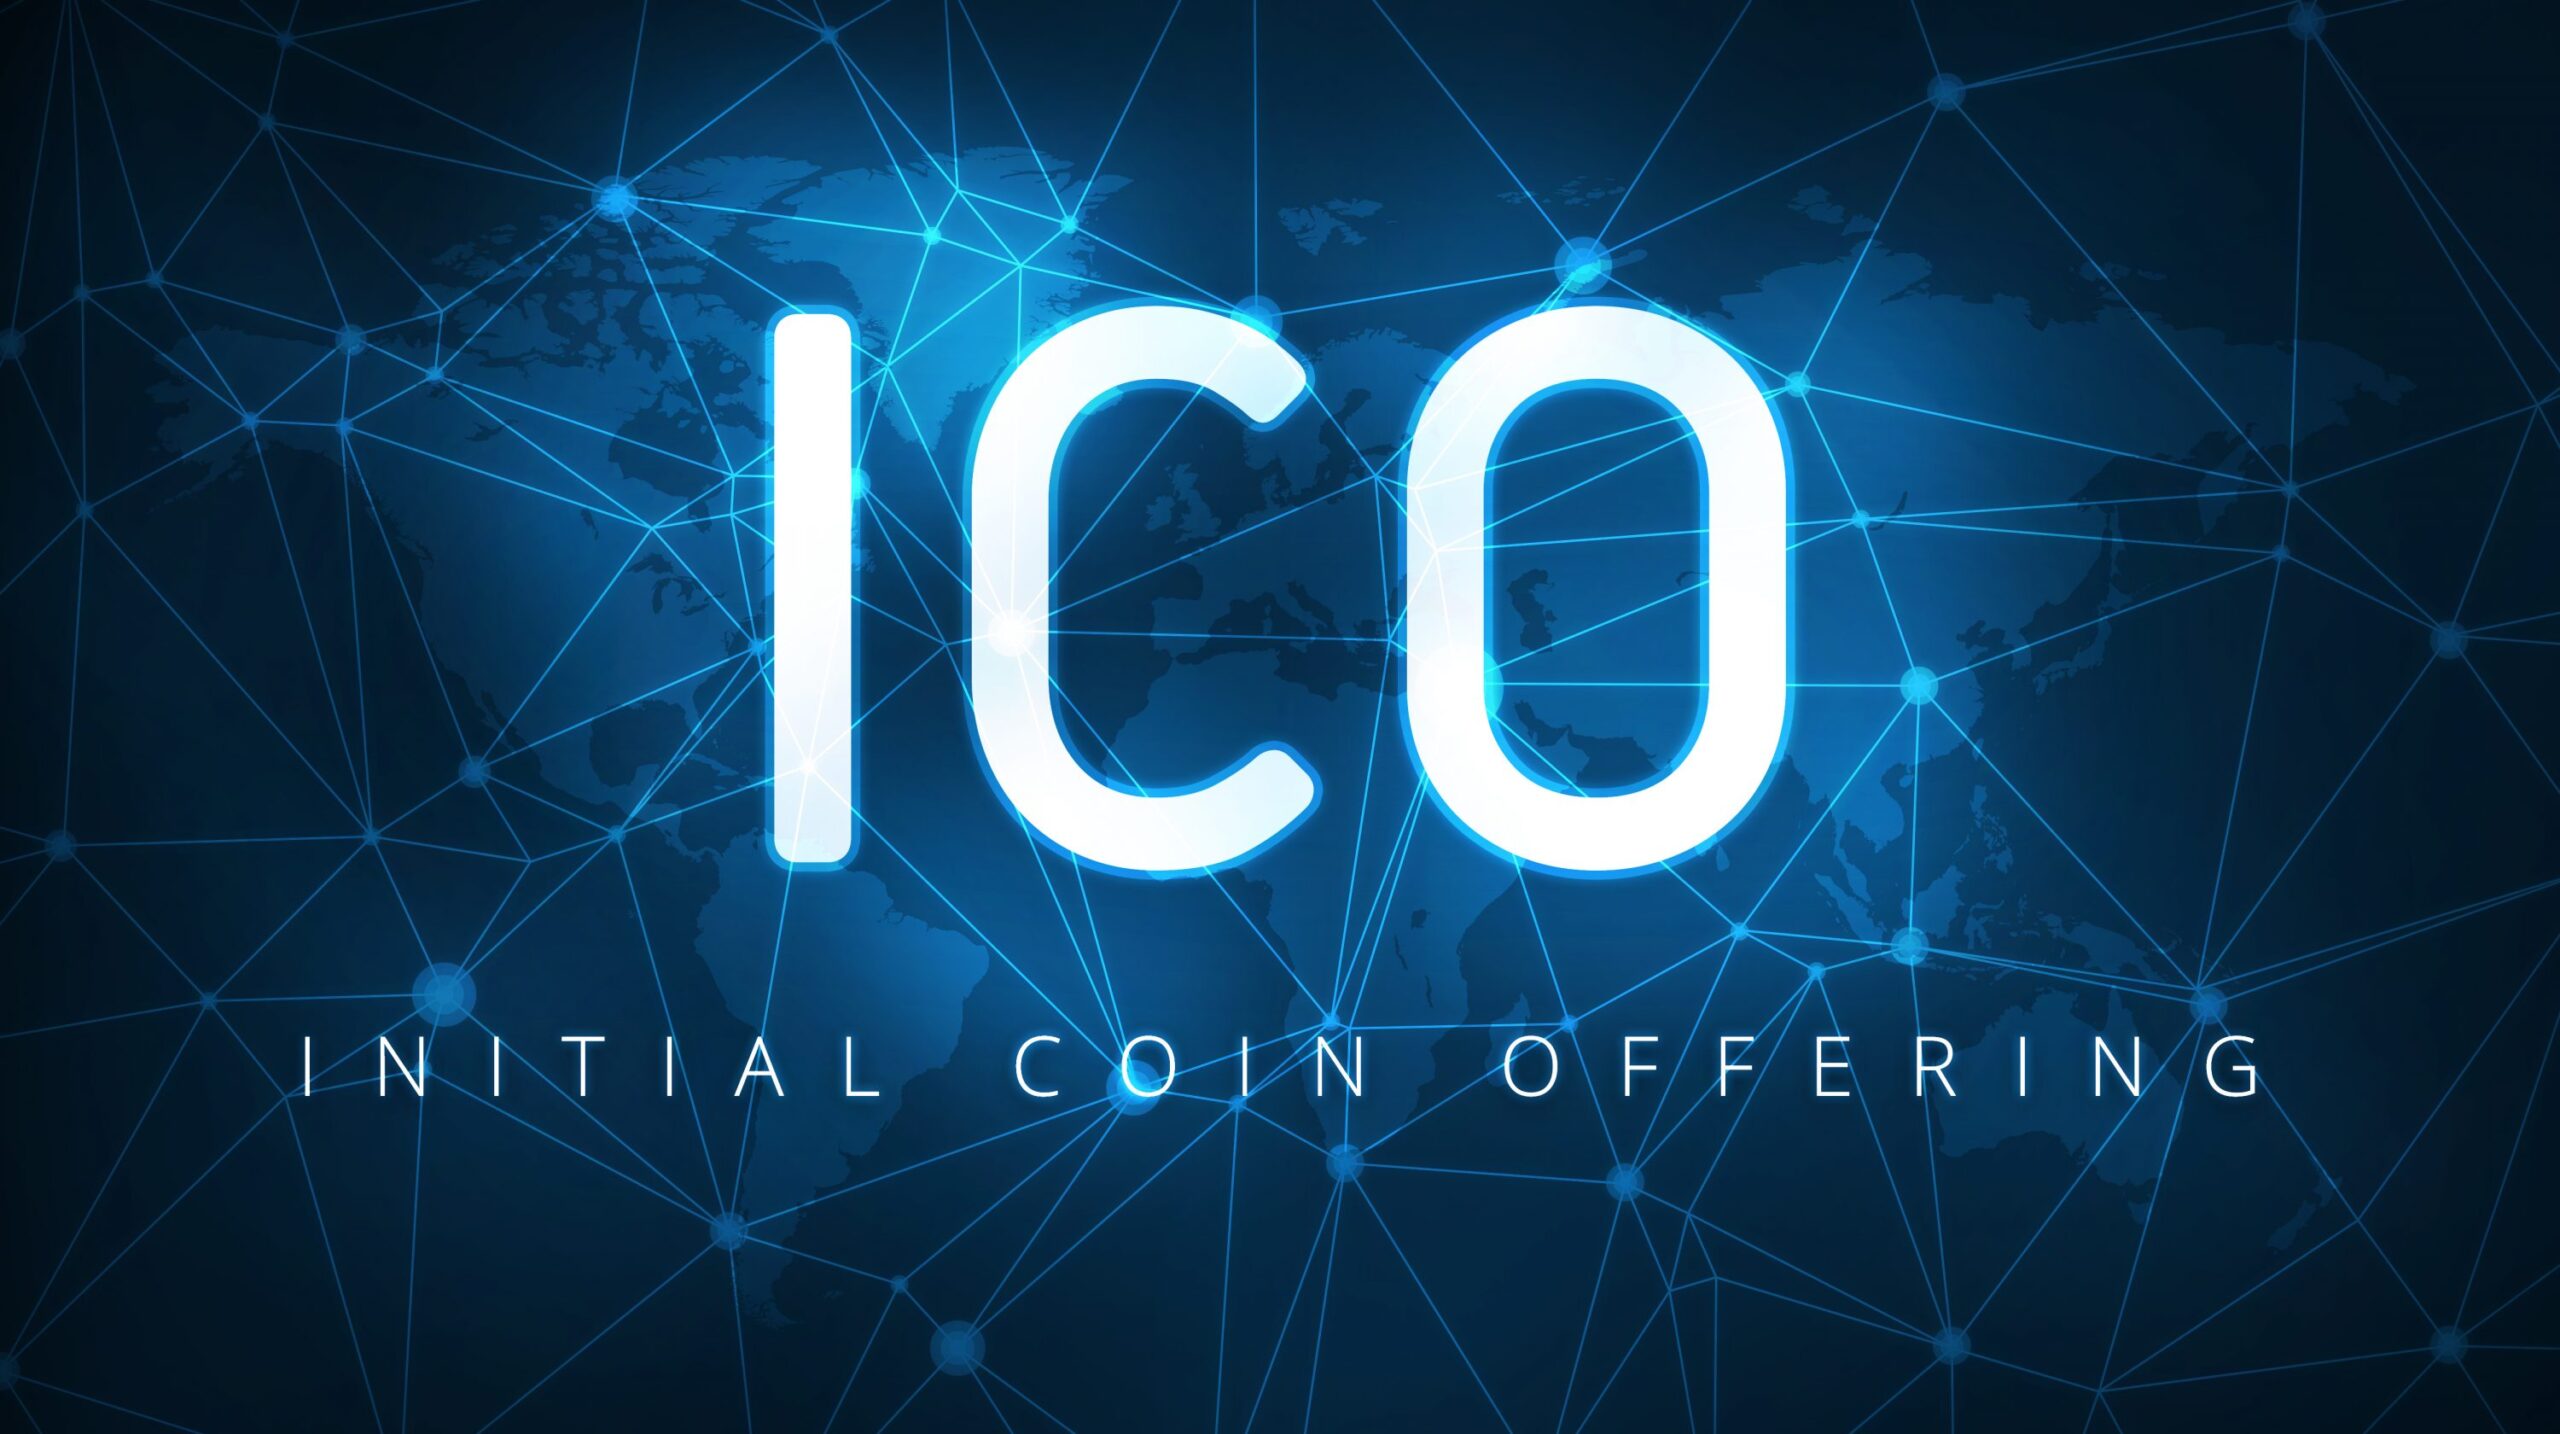 Investing in Initial Coin Offerings (ICOs) – Pros and Cons